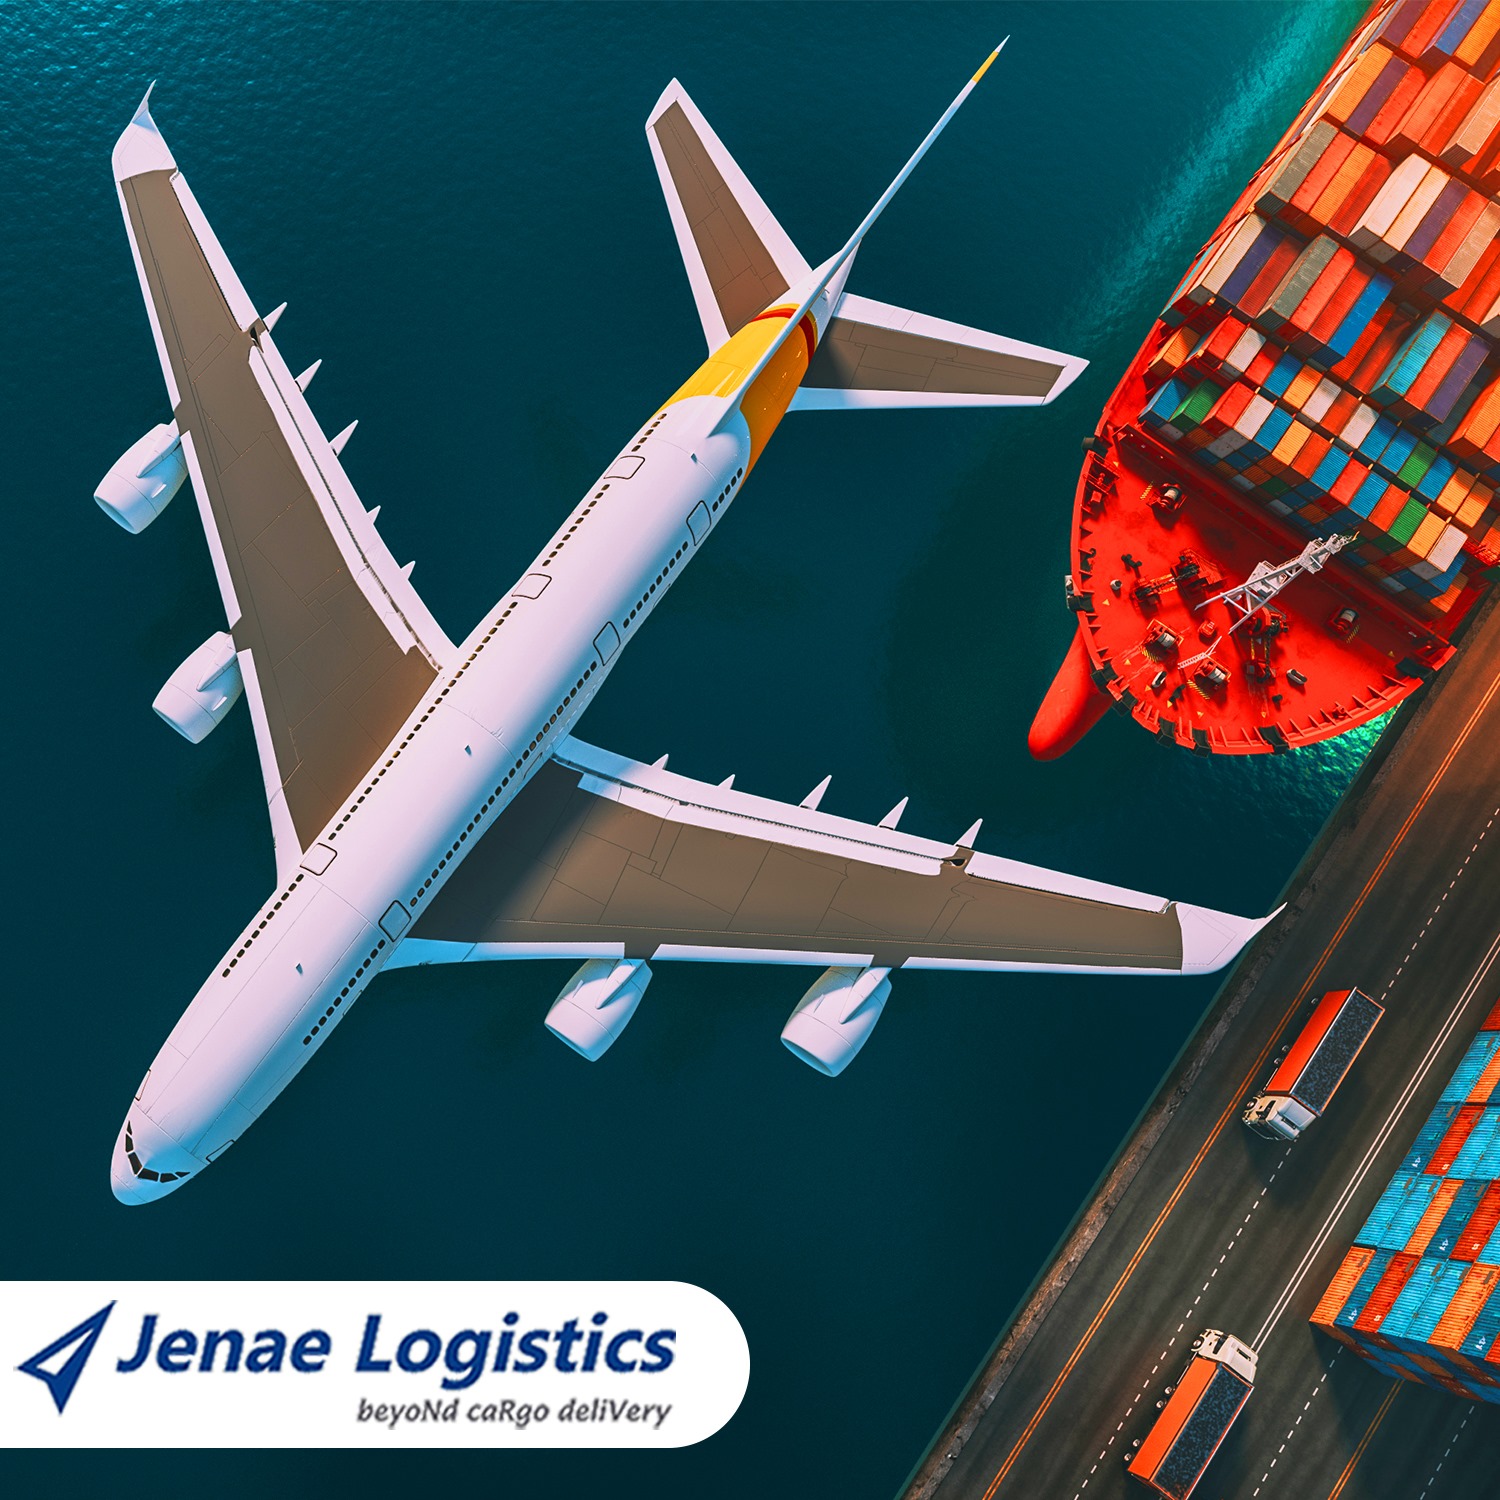 Air Freight vs. Sea Freight: Which One Is Better?